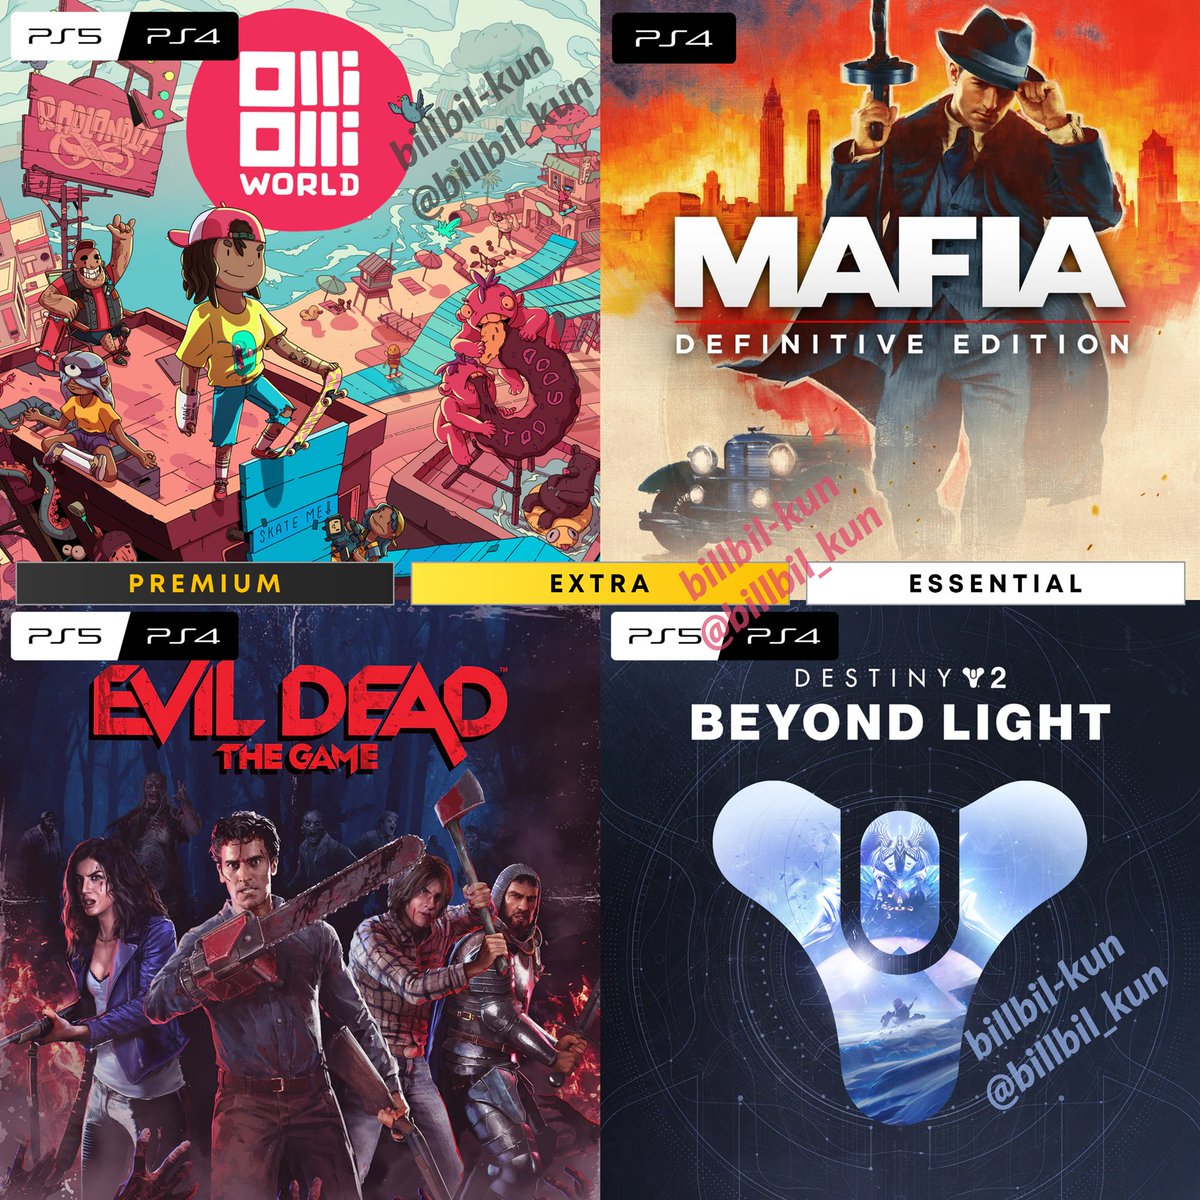 PlayStation on X: Your PlayStation Plus games for February have been  revealed: 🪐 Destiny 2: Beyond Light 🧟 Evil Dead: The Game 🛹  OlliOlliWorld 🕵️‍♂️ Mafia: The Definitive Edition Full details